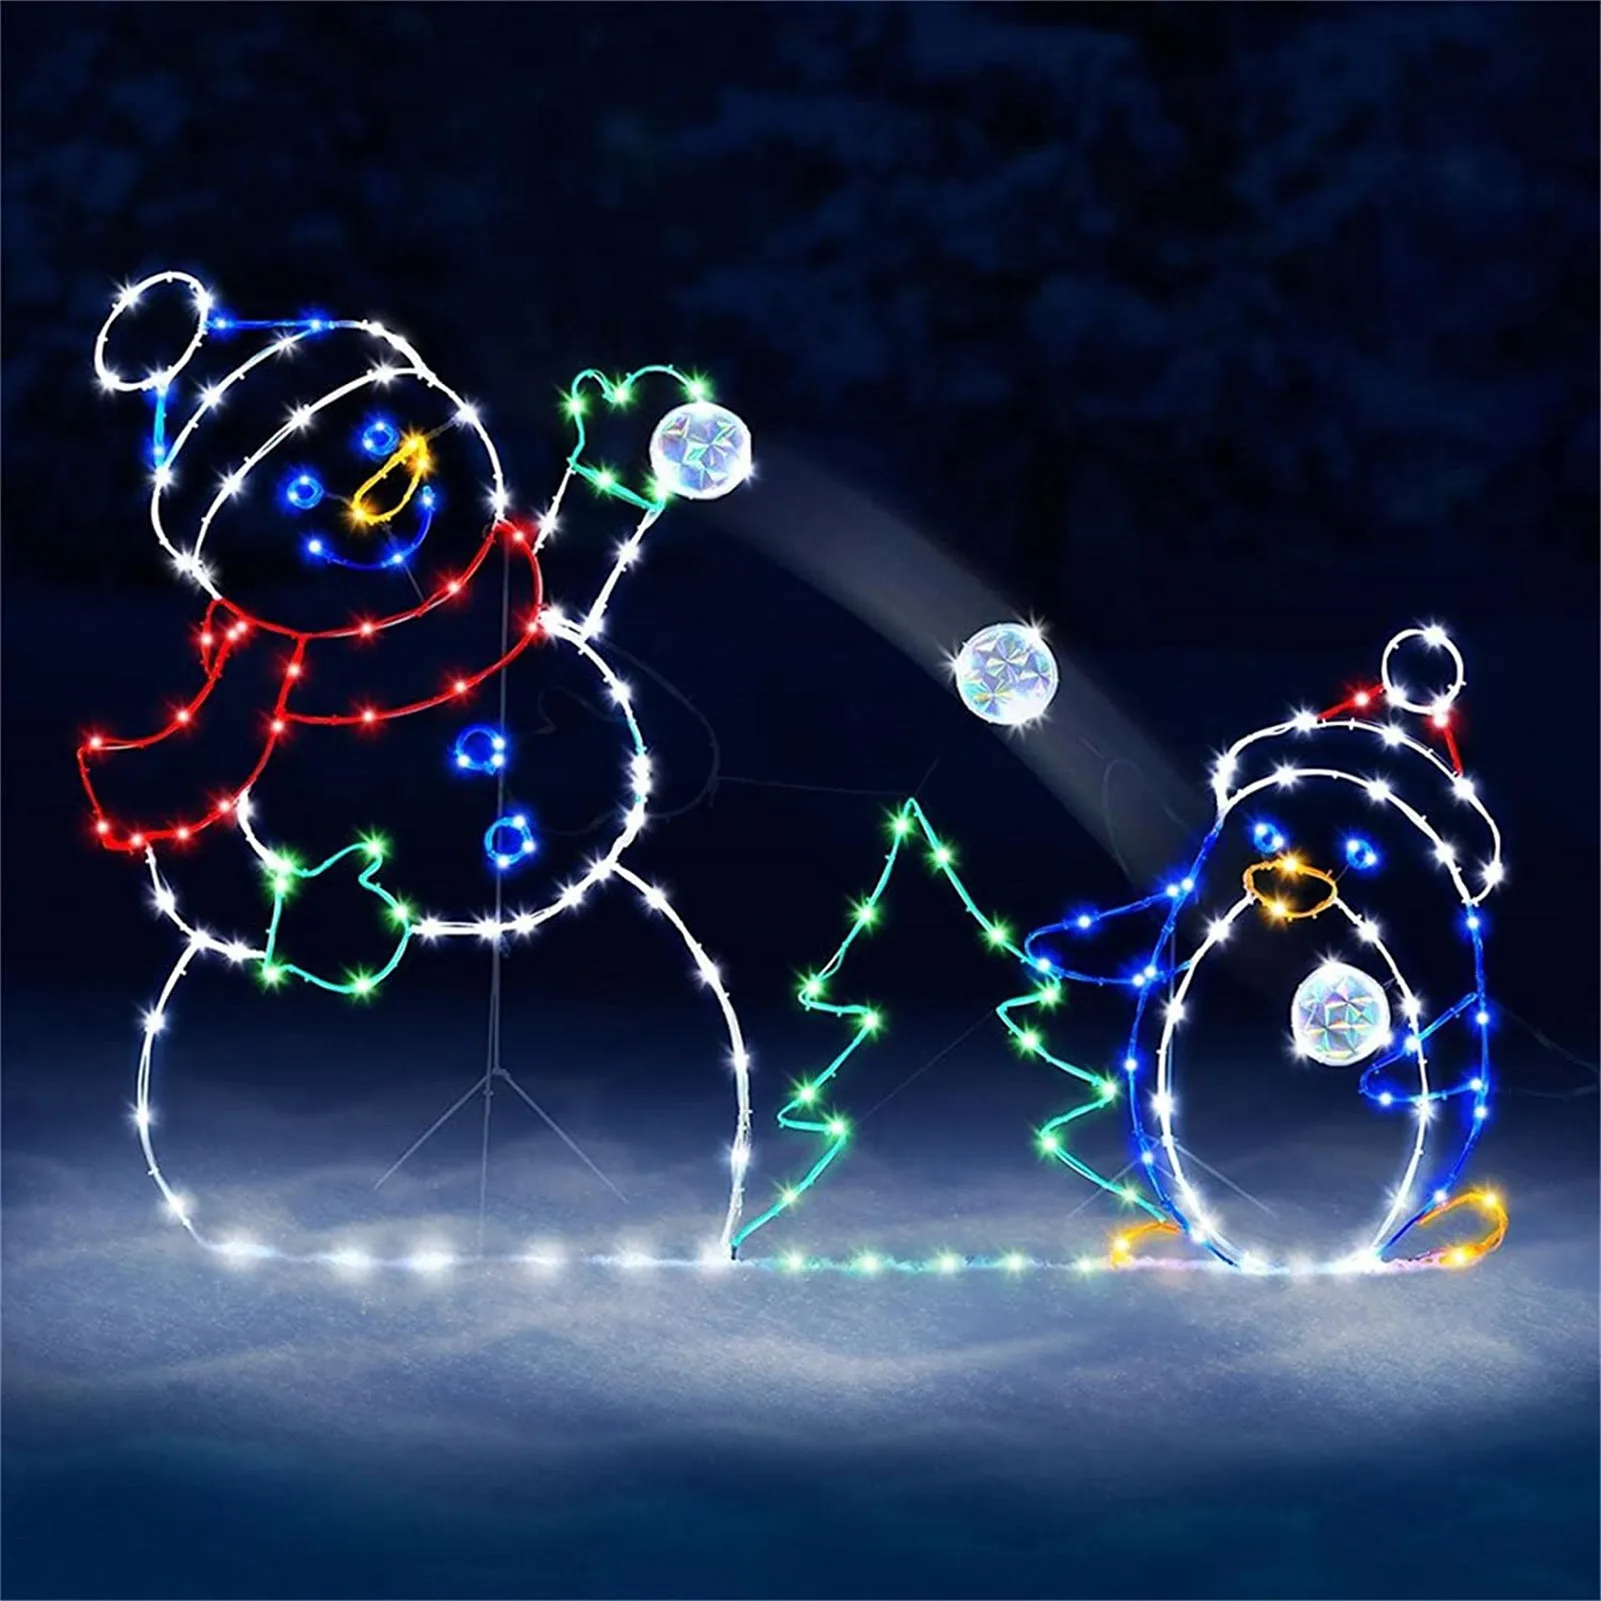 

Christmas Glowing Decorative Snowman Fun Animated Snowball Fight Active Light String Frame Decor Christmas Luminous Ornaments F